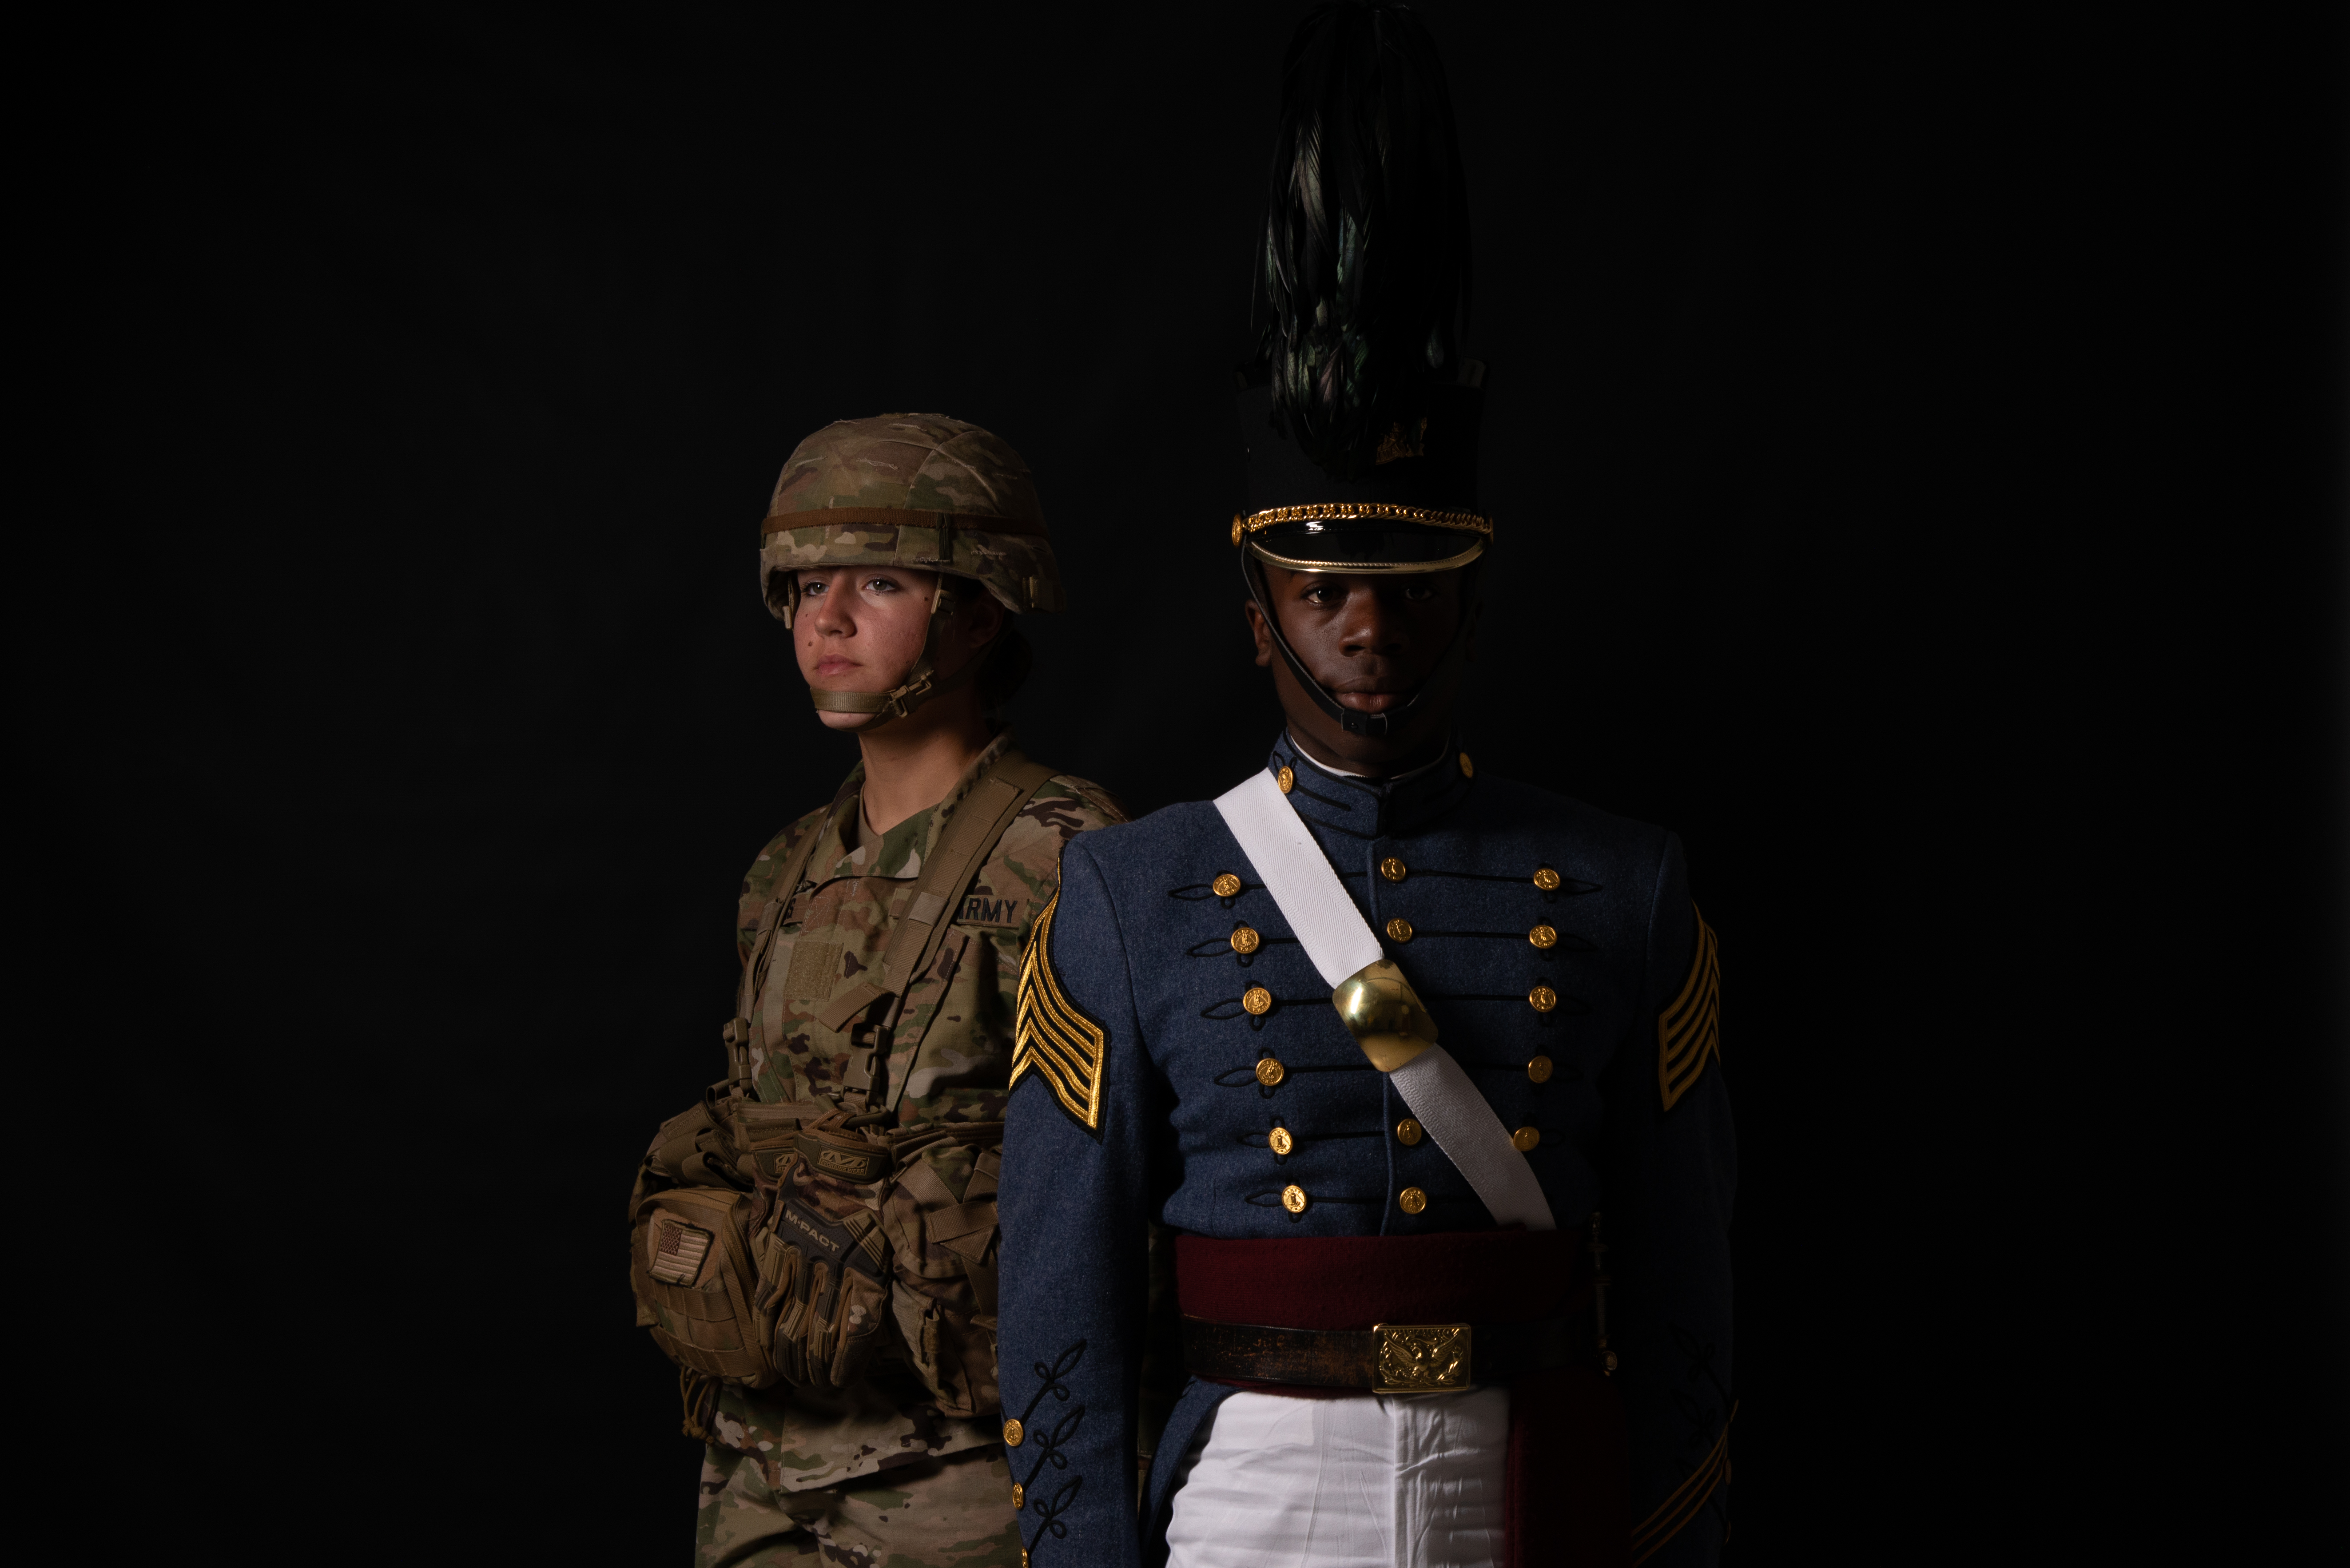 Cadets in dress uniform and battle ready gear